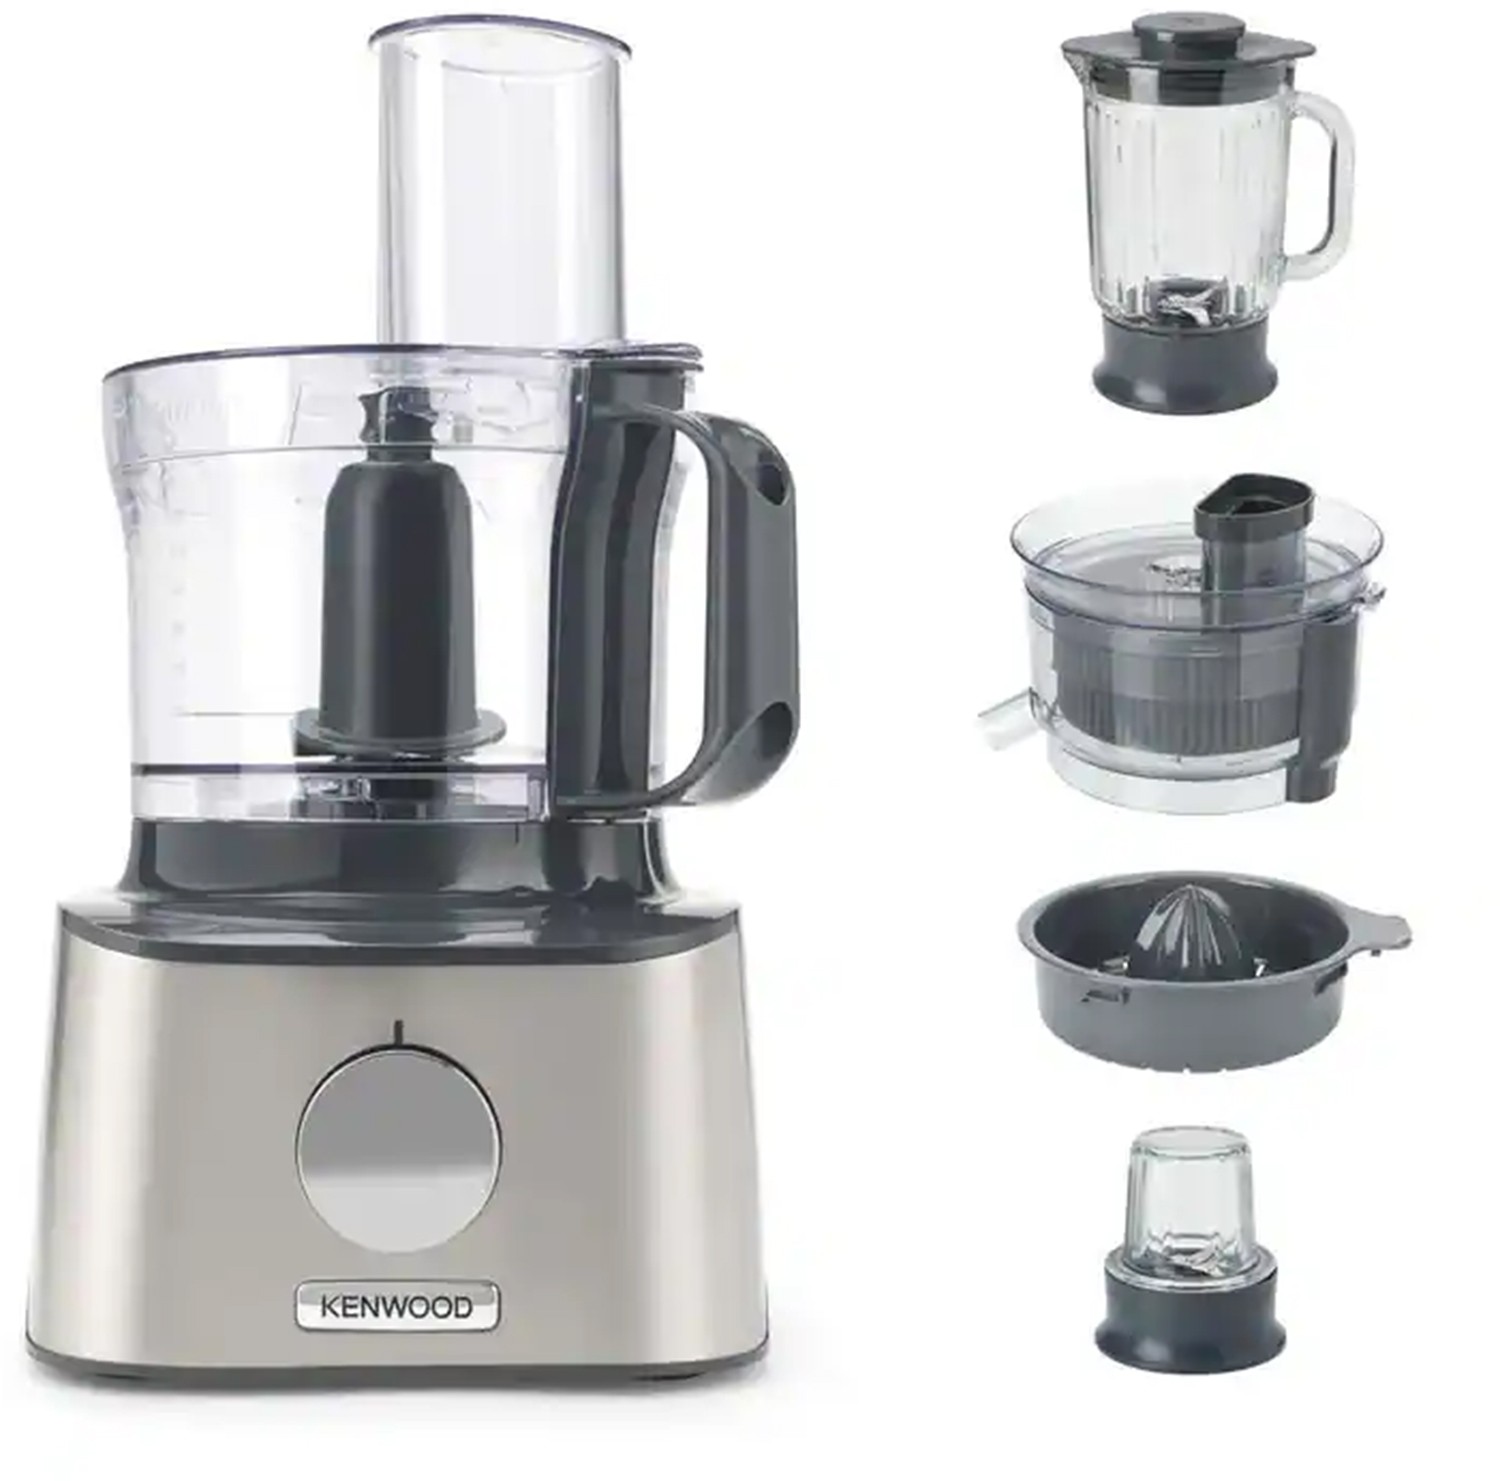 KENWOOD Robot culinaire Multipro Compact 800W 2.1L Inox - FDM307SS